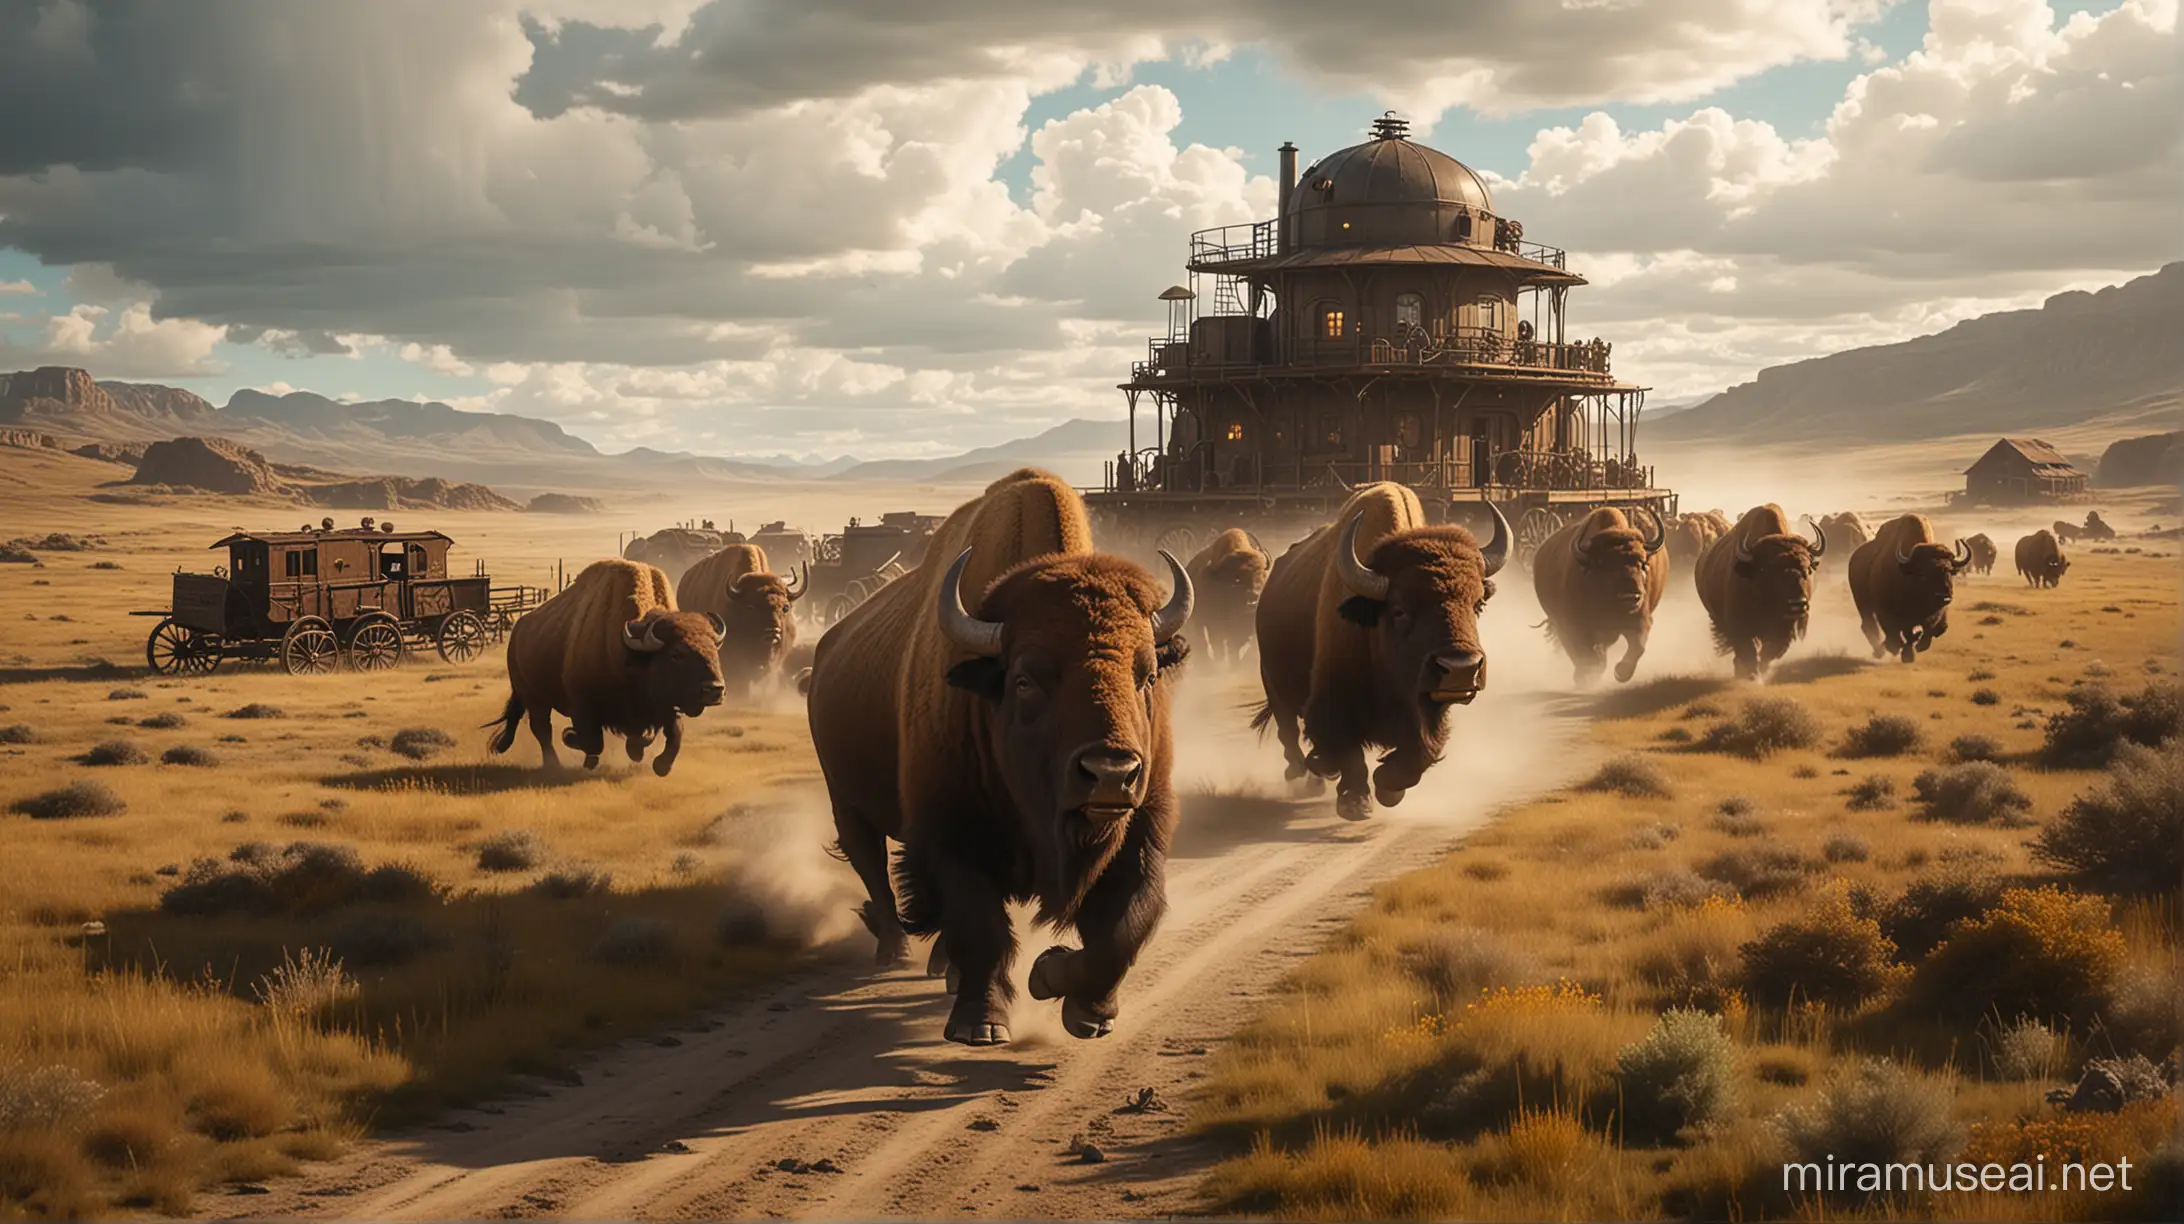 Bison Stampede Approaching Steampunk Ranch in Wilderness Under Sunny and Cloudy Skies